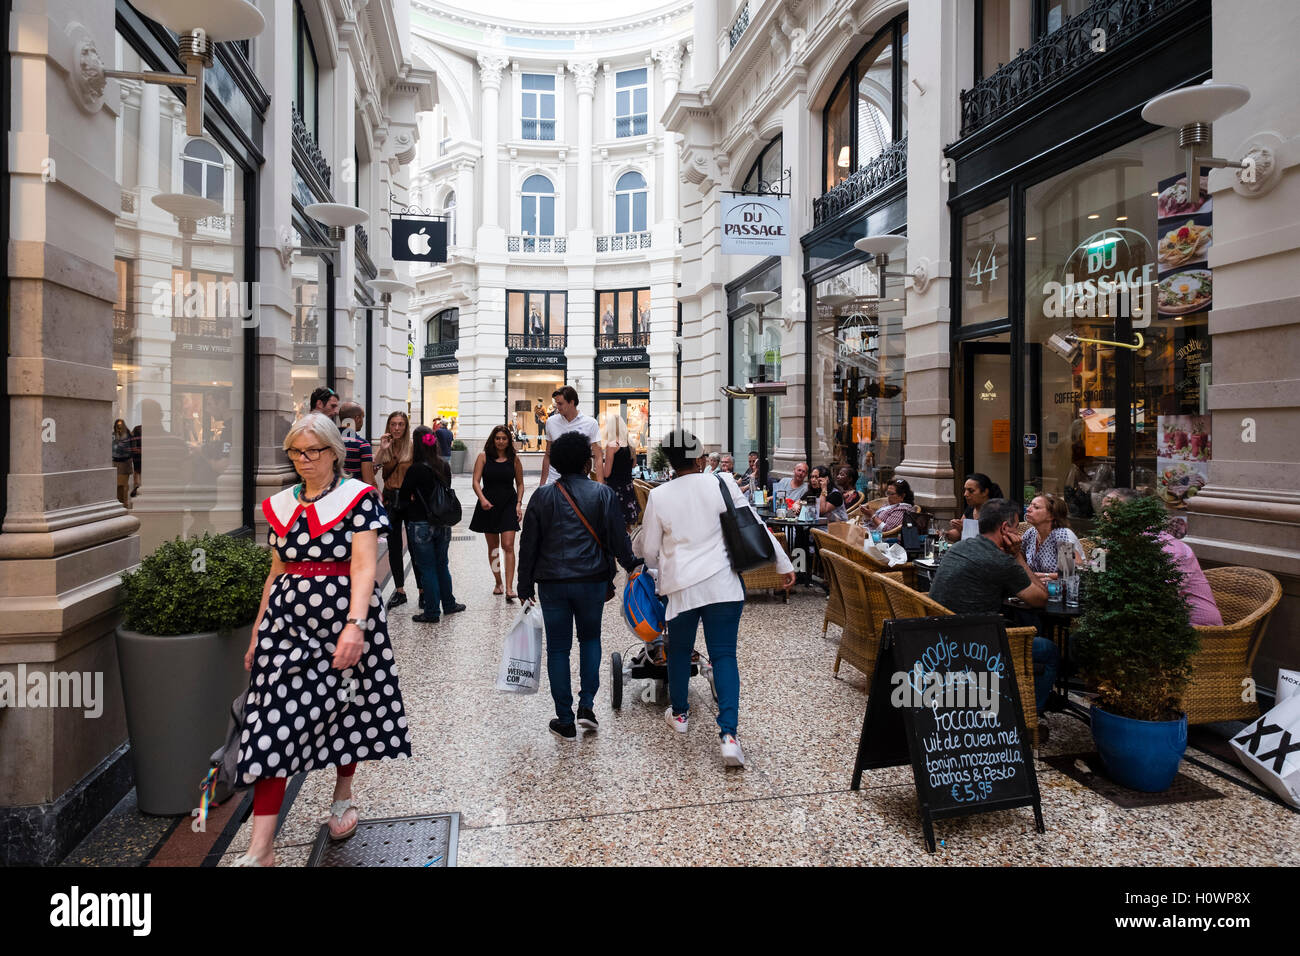 Interior of Passage shopping mall in Den Haag, The Hague, Netherlands Stock Photo